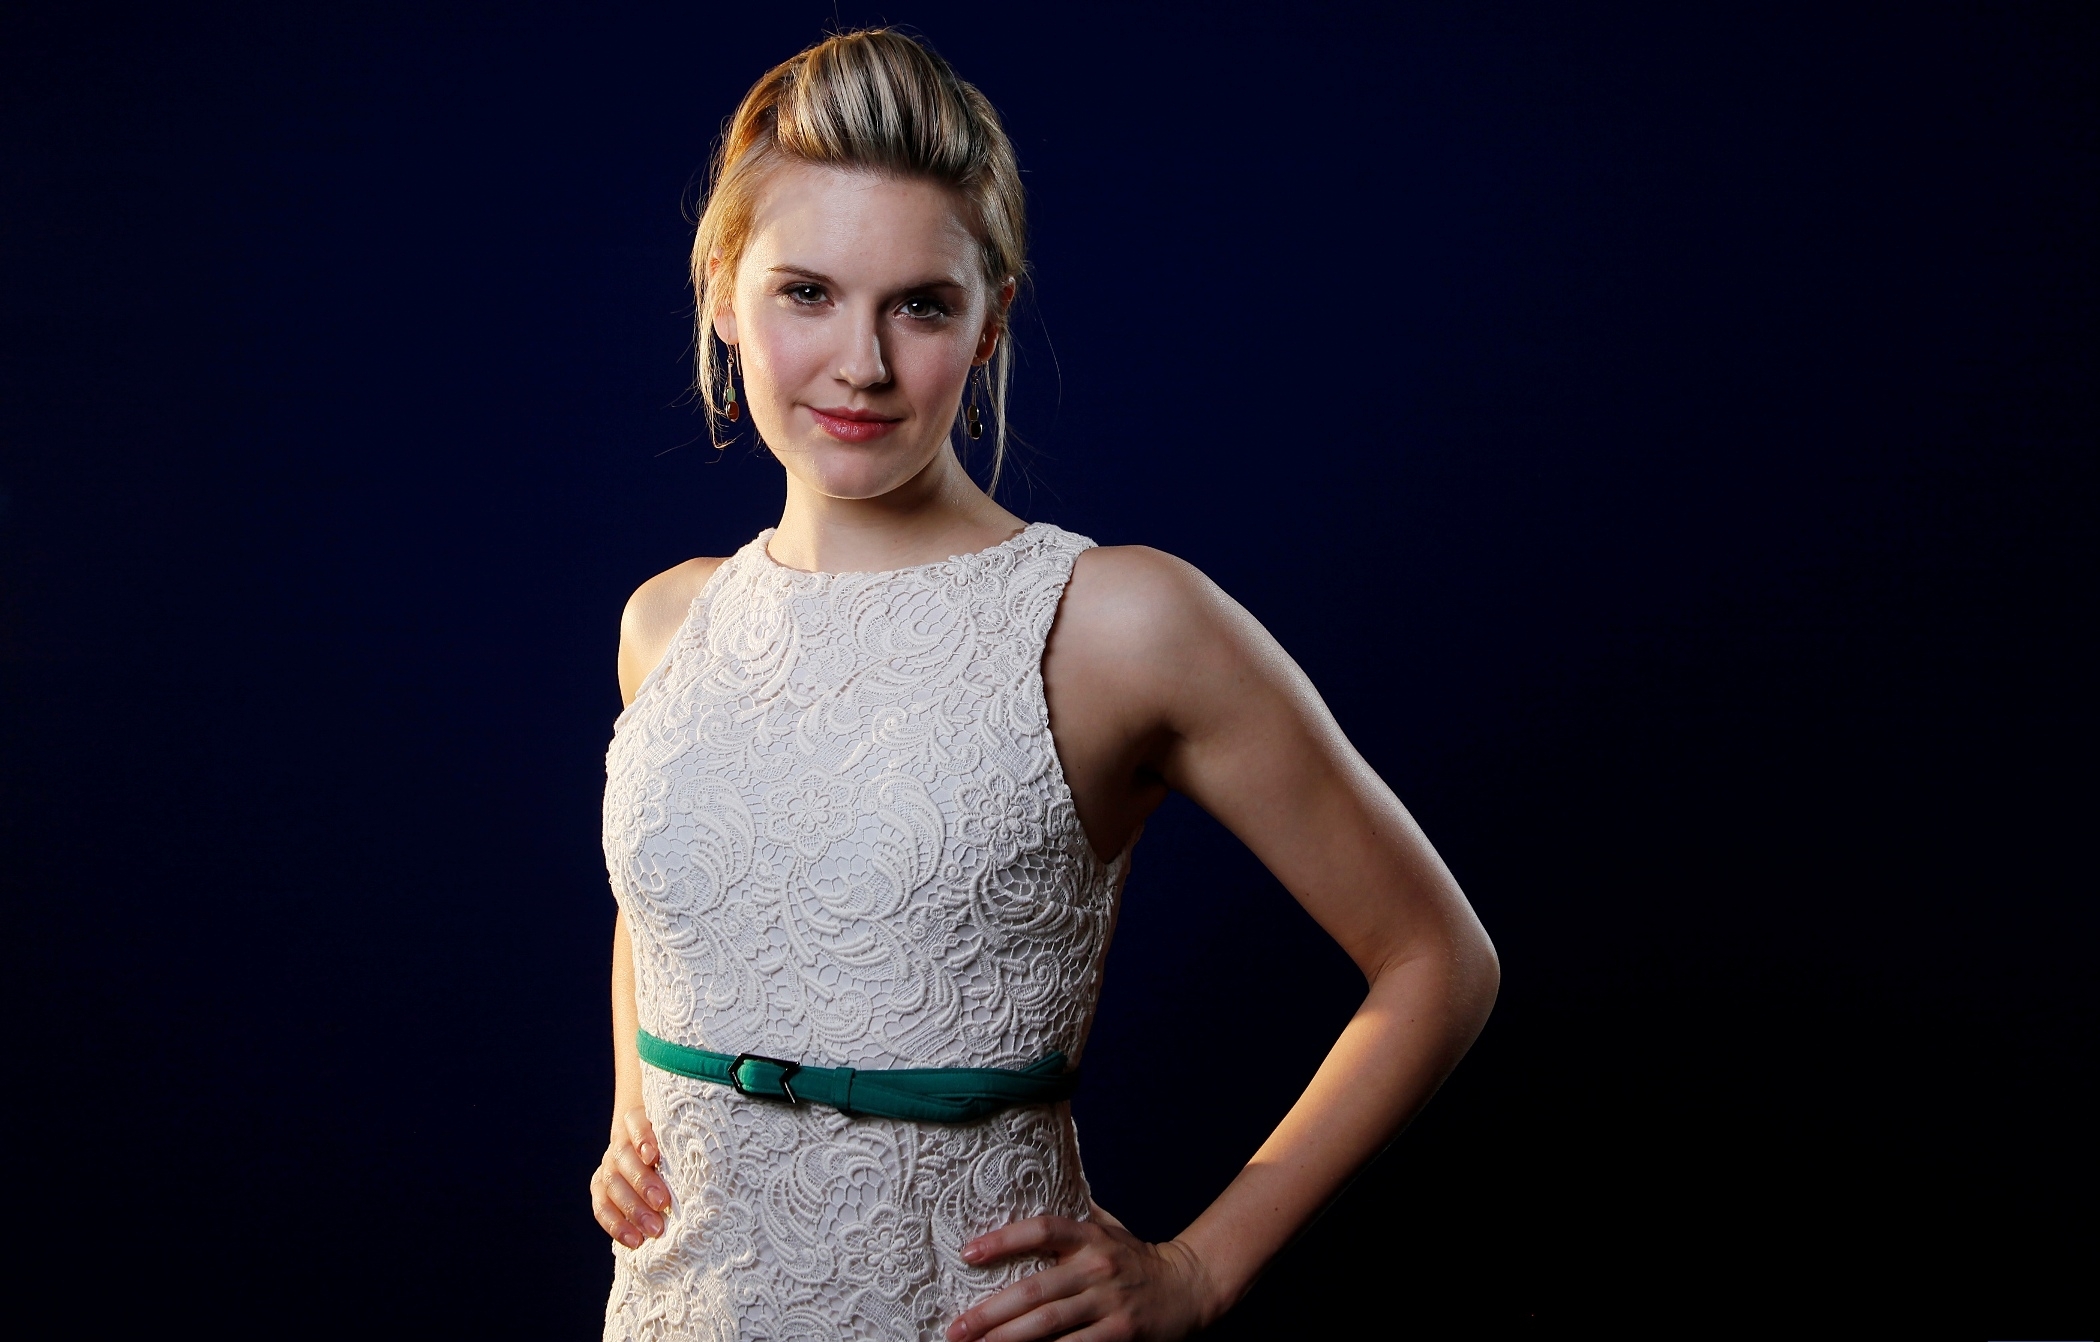 Maggie Grace Wallpapers Pictures Images HD Wallpapers Download Free Map Images Wallpaper [wallpaper684.blogspot.com]